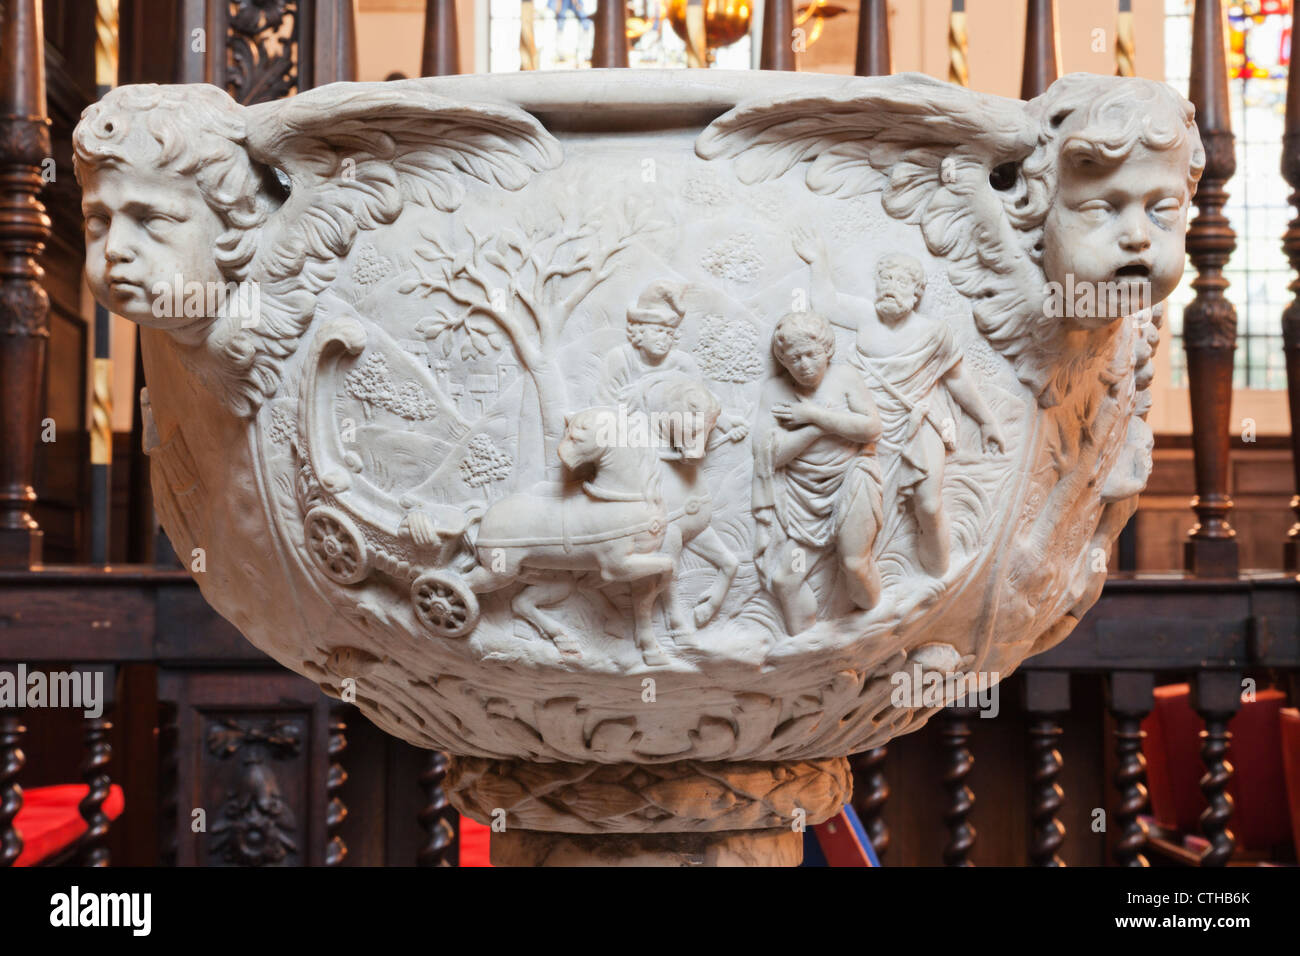 England, London, The City, St.Margaret Lothbury Church, The Font depicting Biblical Scenes and Cherub Heads Stock Photo